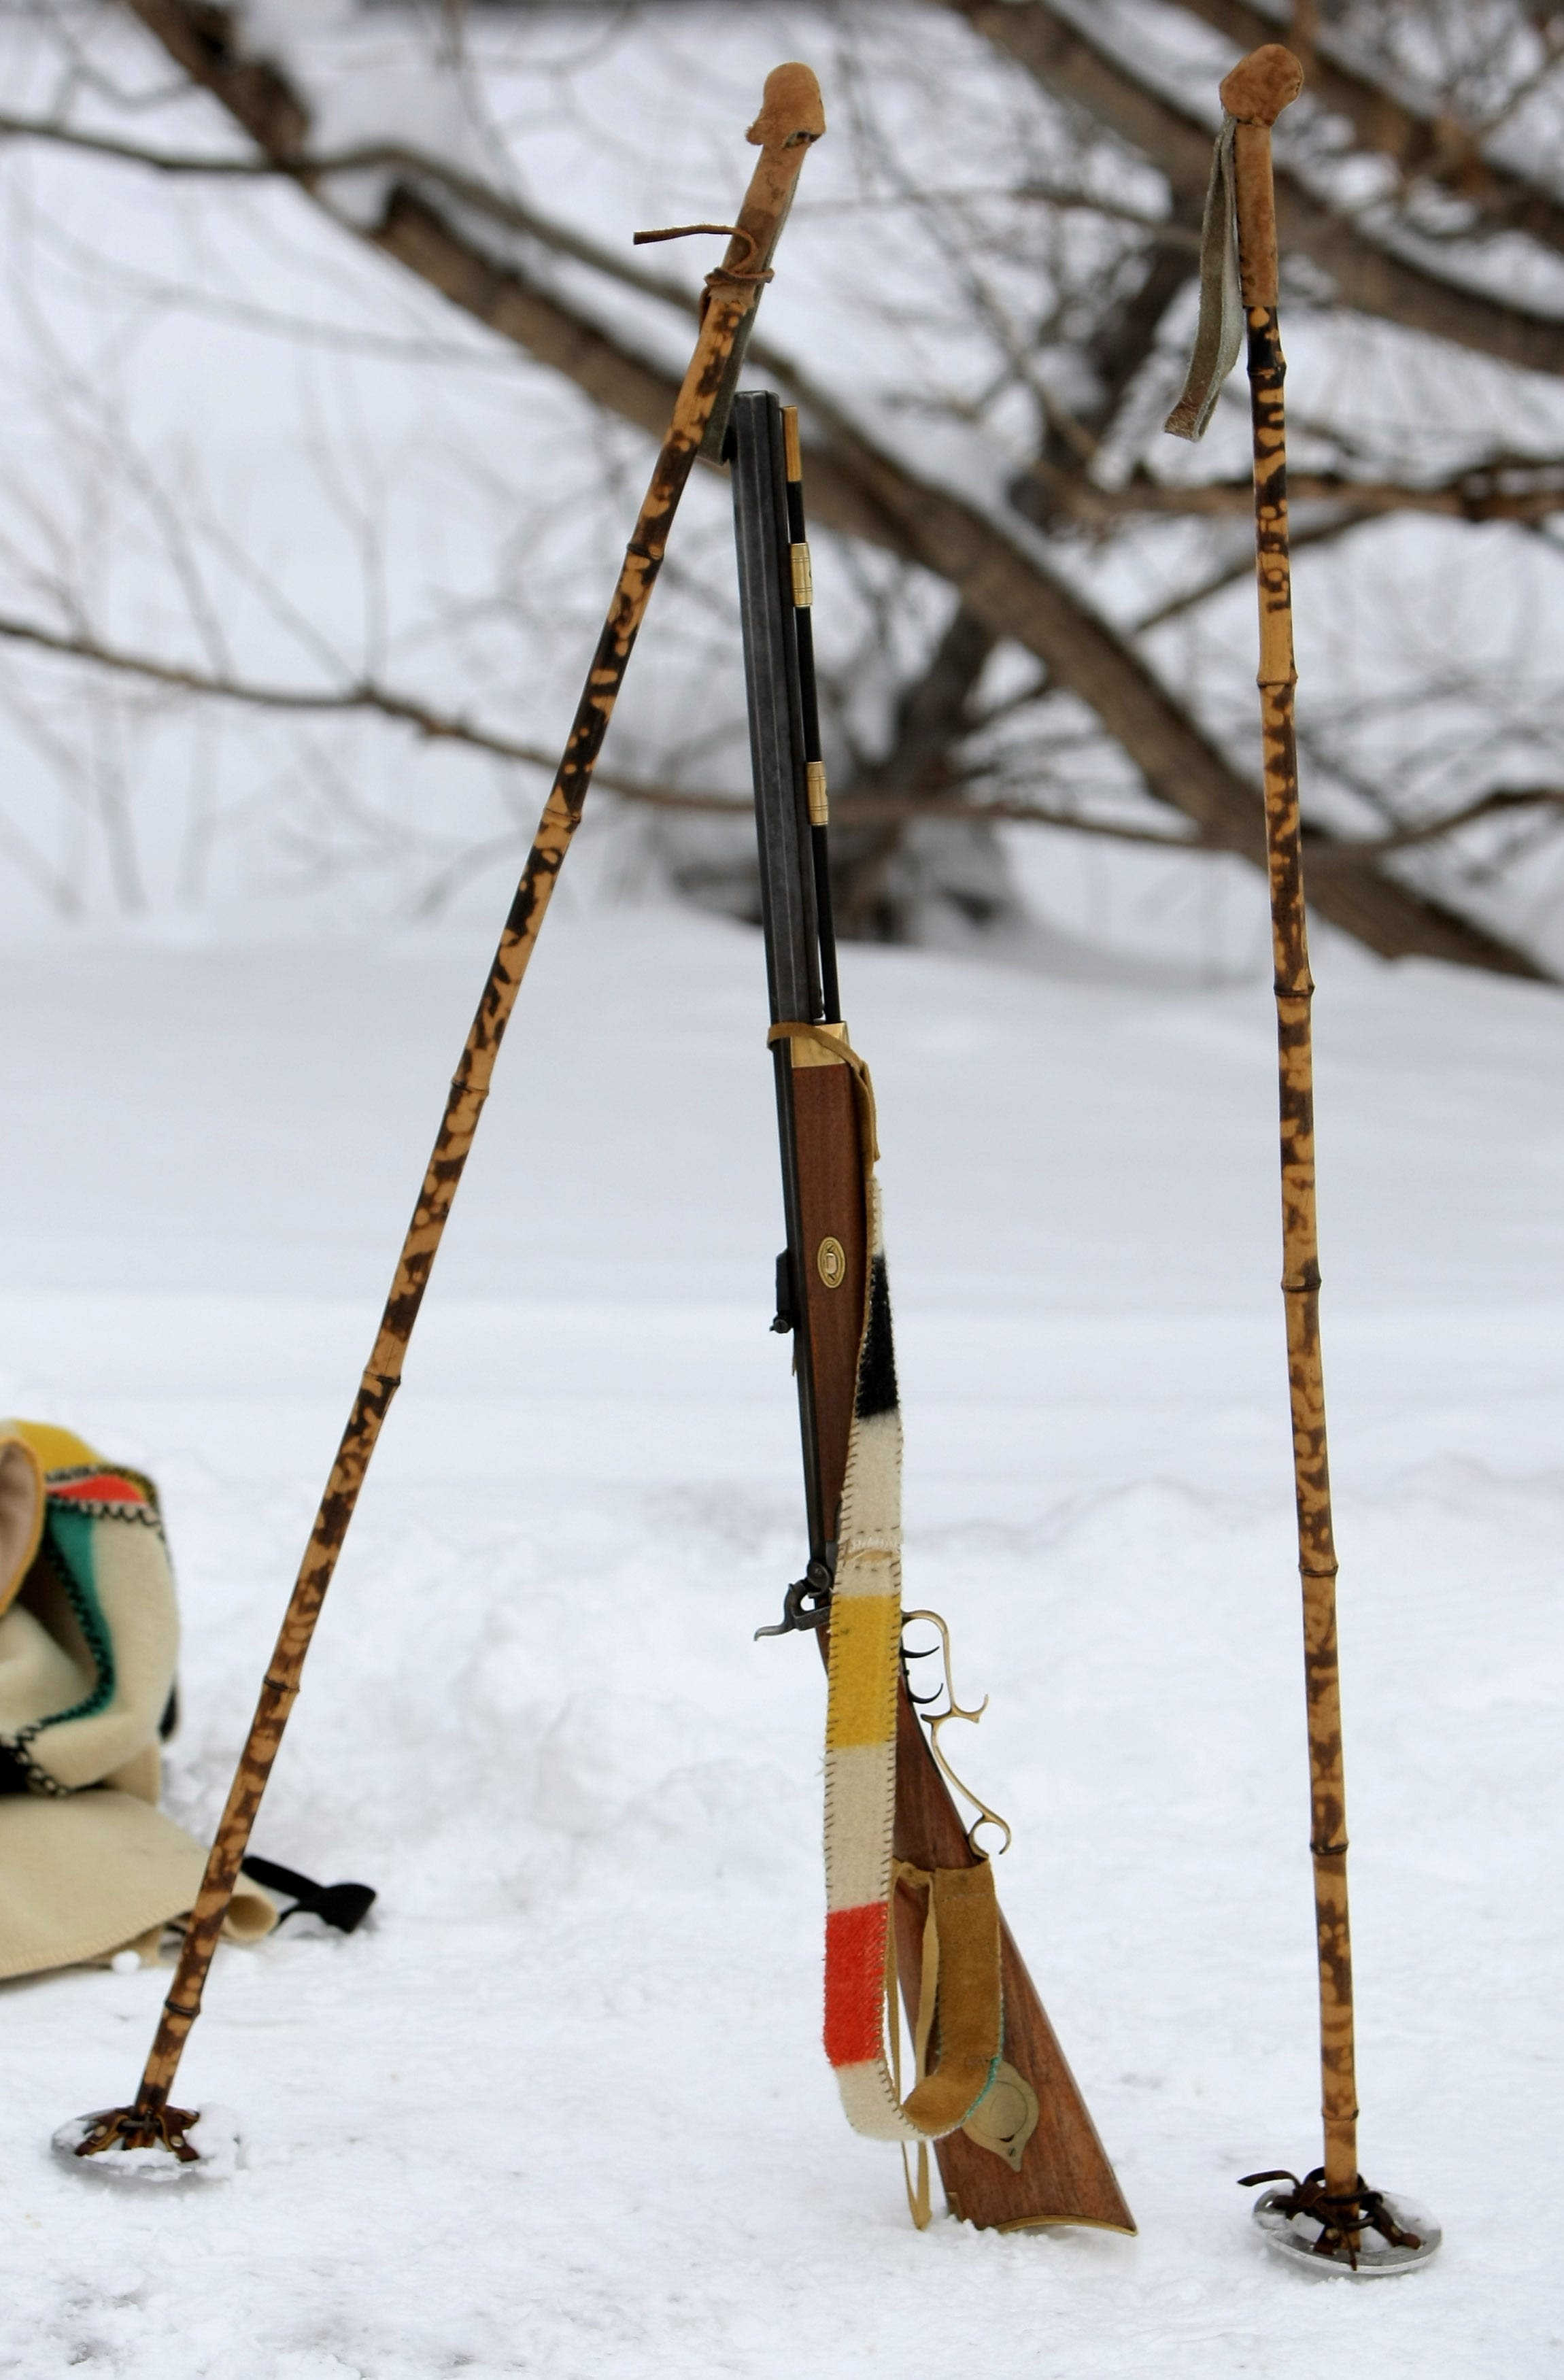 Supreme Court affirms ex-felon's conviction for hunting with 'antique' muzzleloader